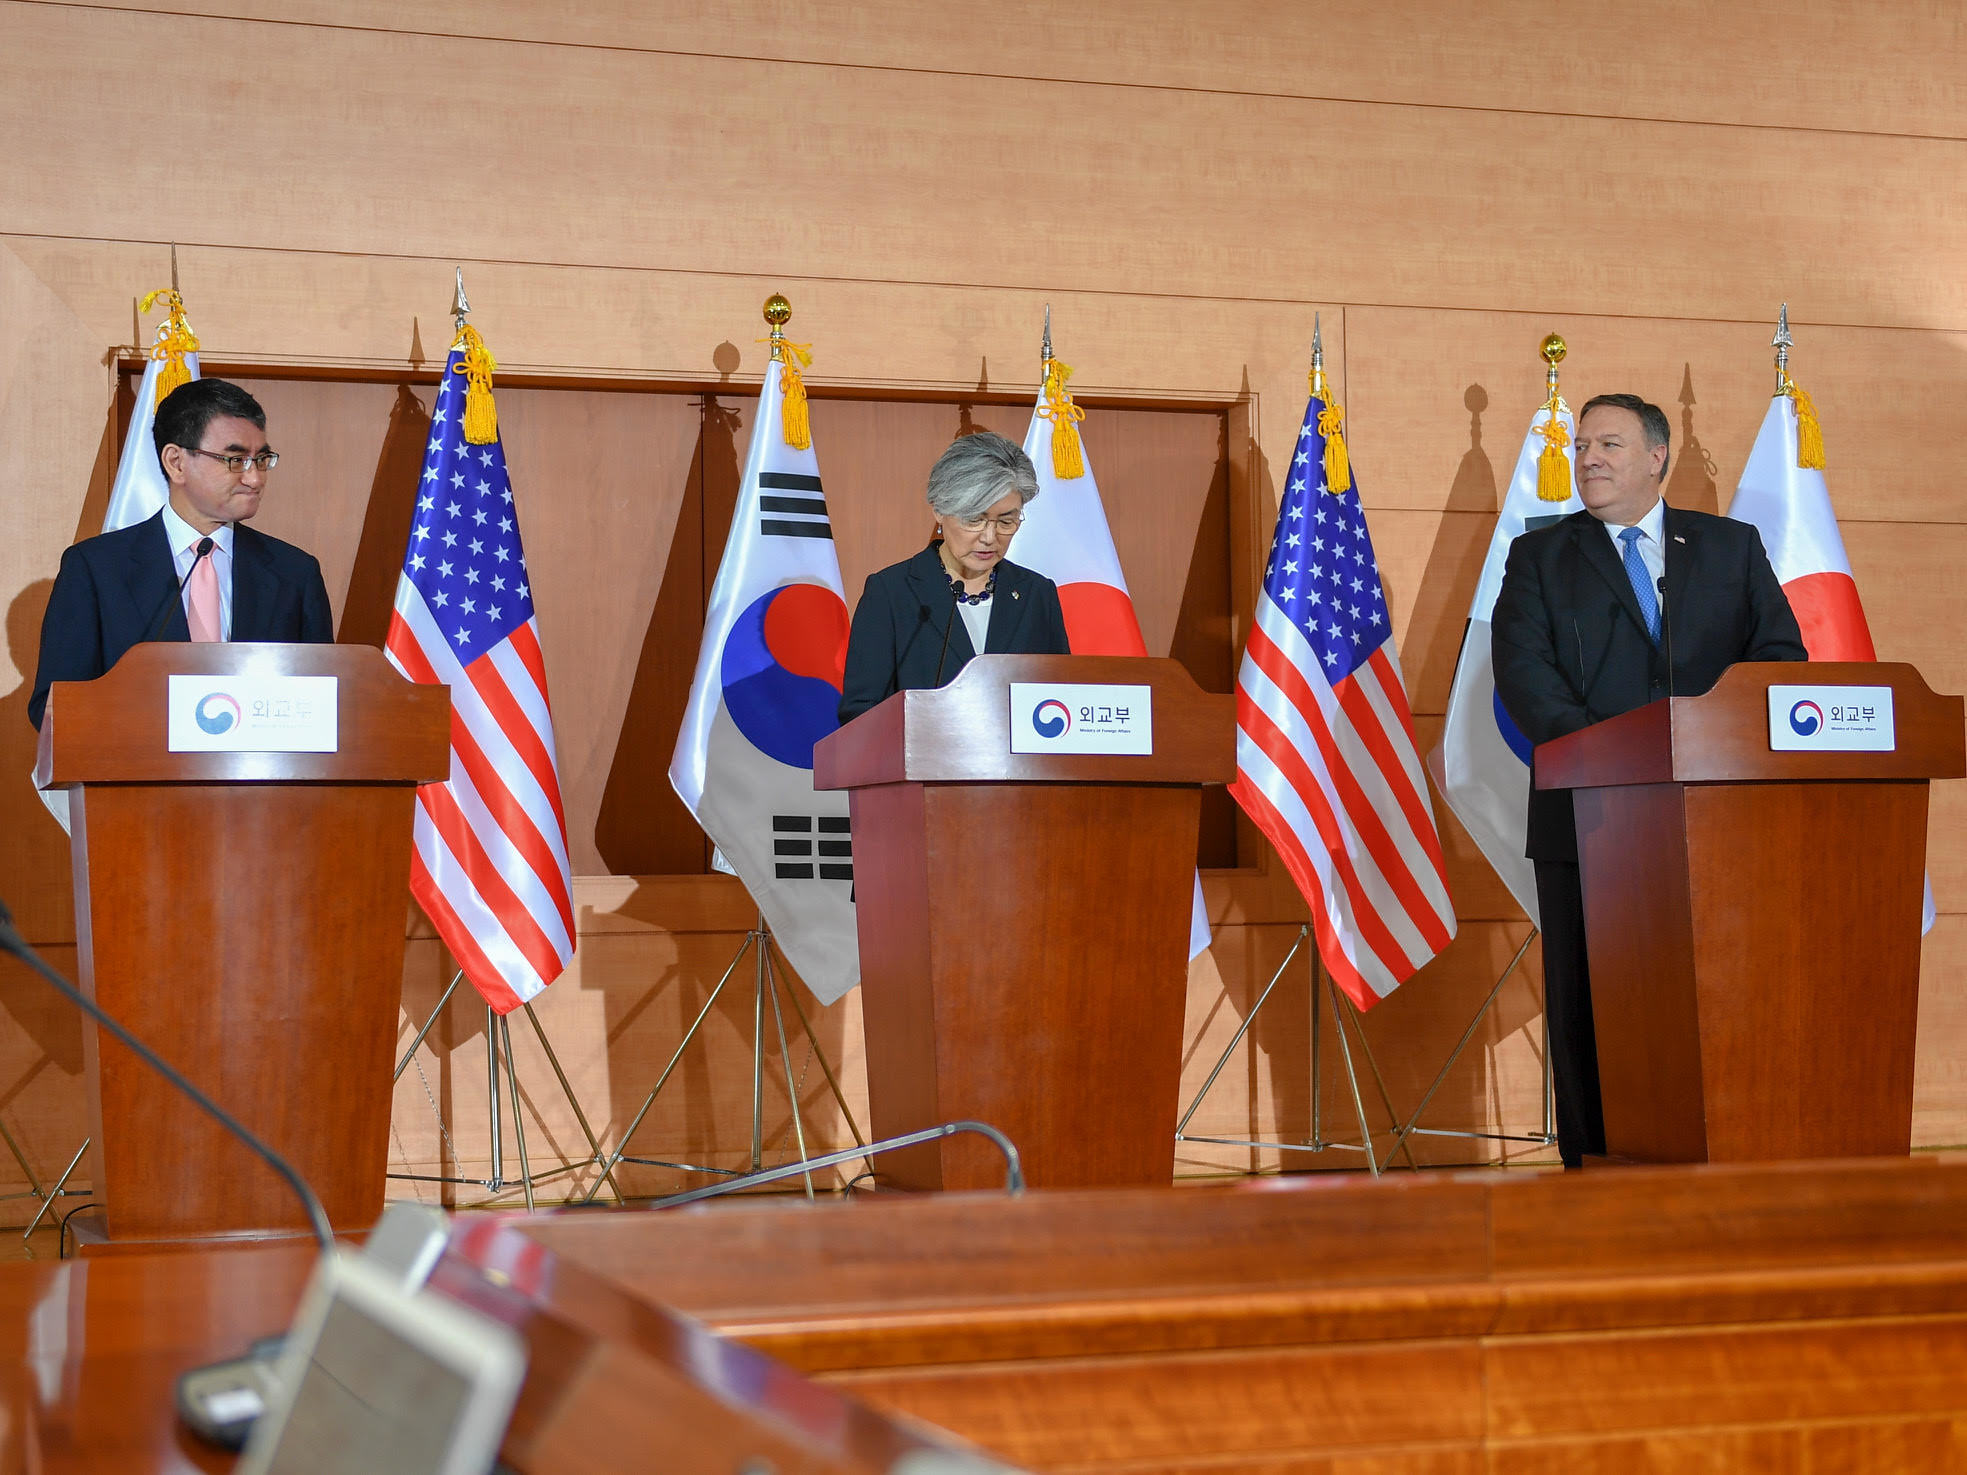 U.S. Secretary of State Mike Pompeo holds a joint press availability with Republic of Korea Foreign Minister Kang Kyung-wha and Japanese Foreign Minister Taro Kono.